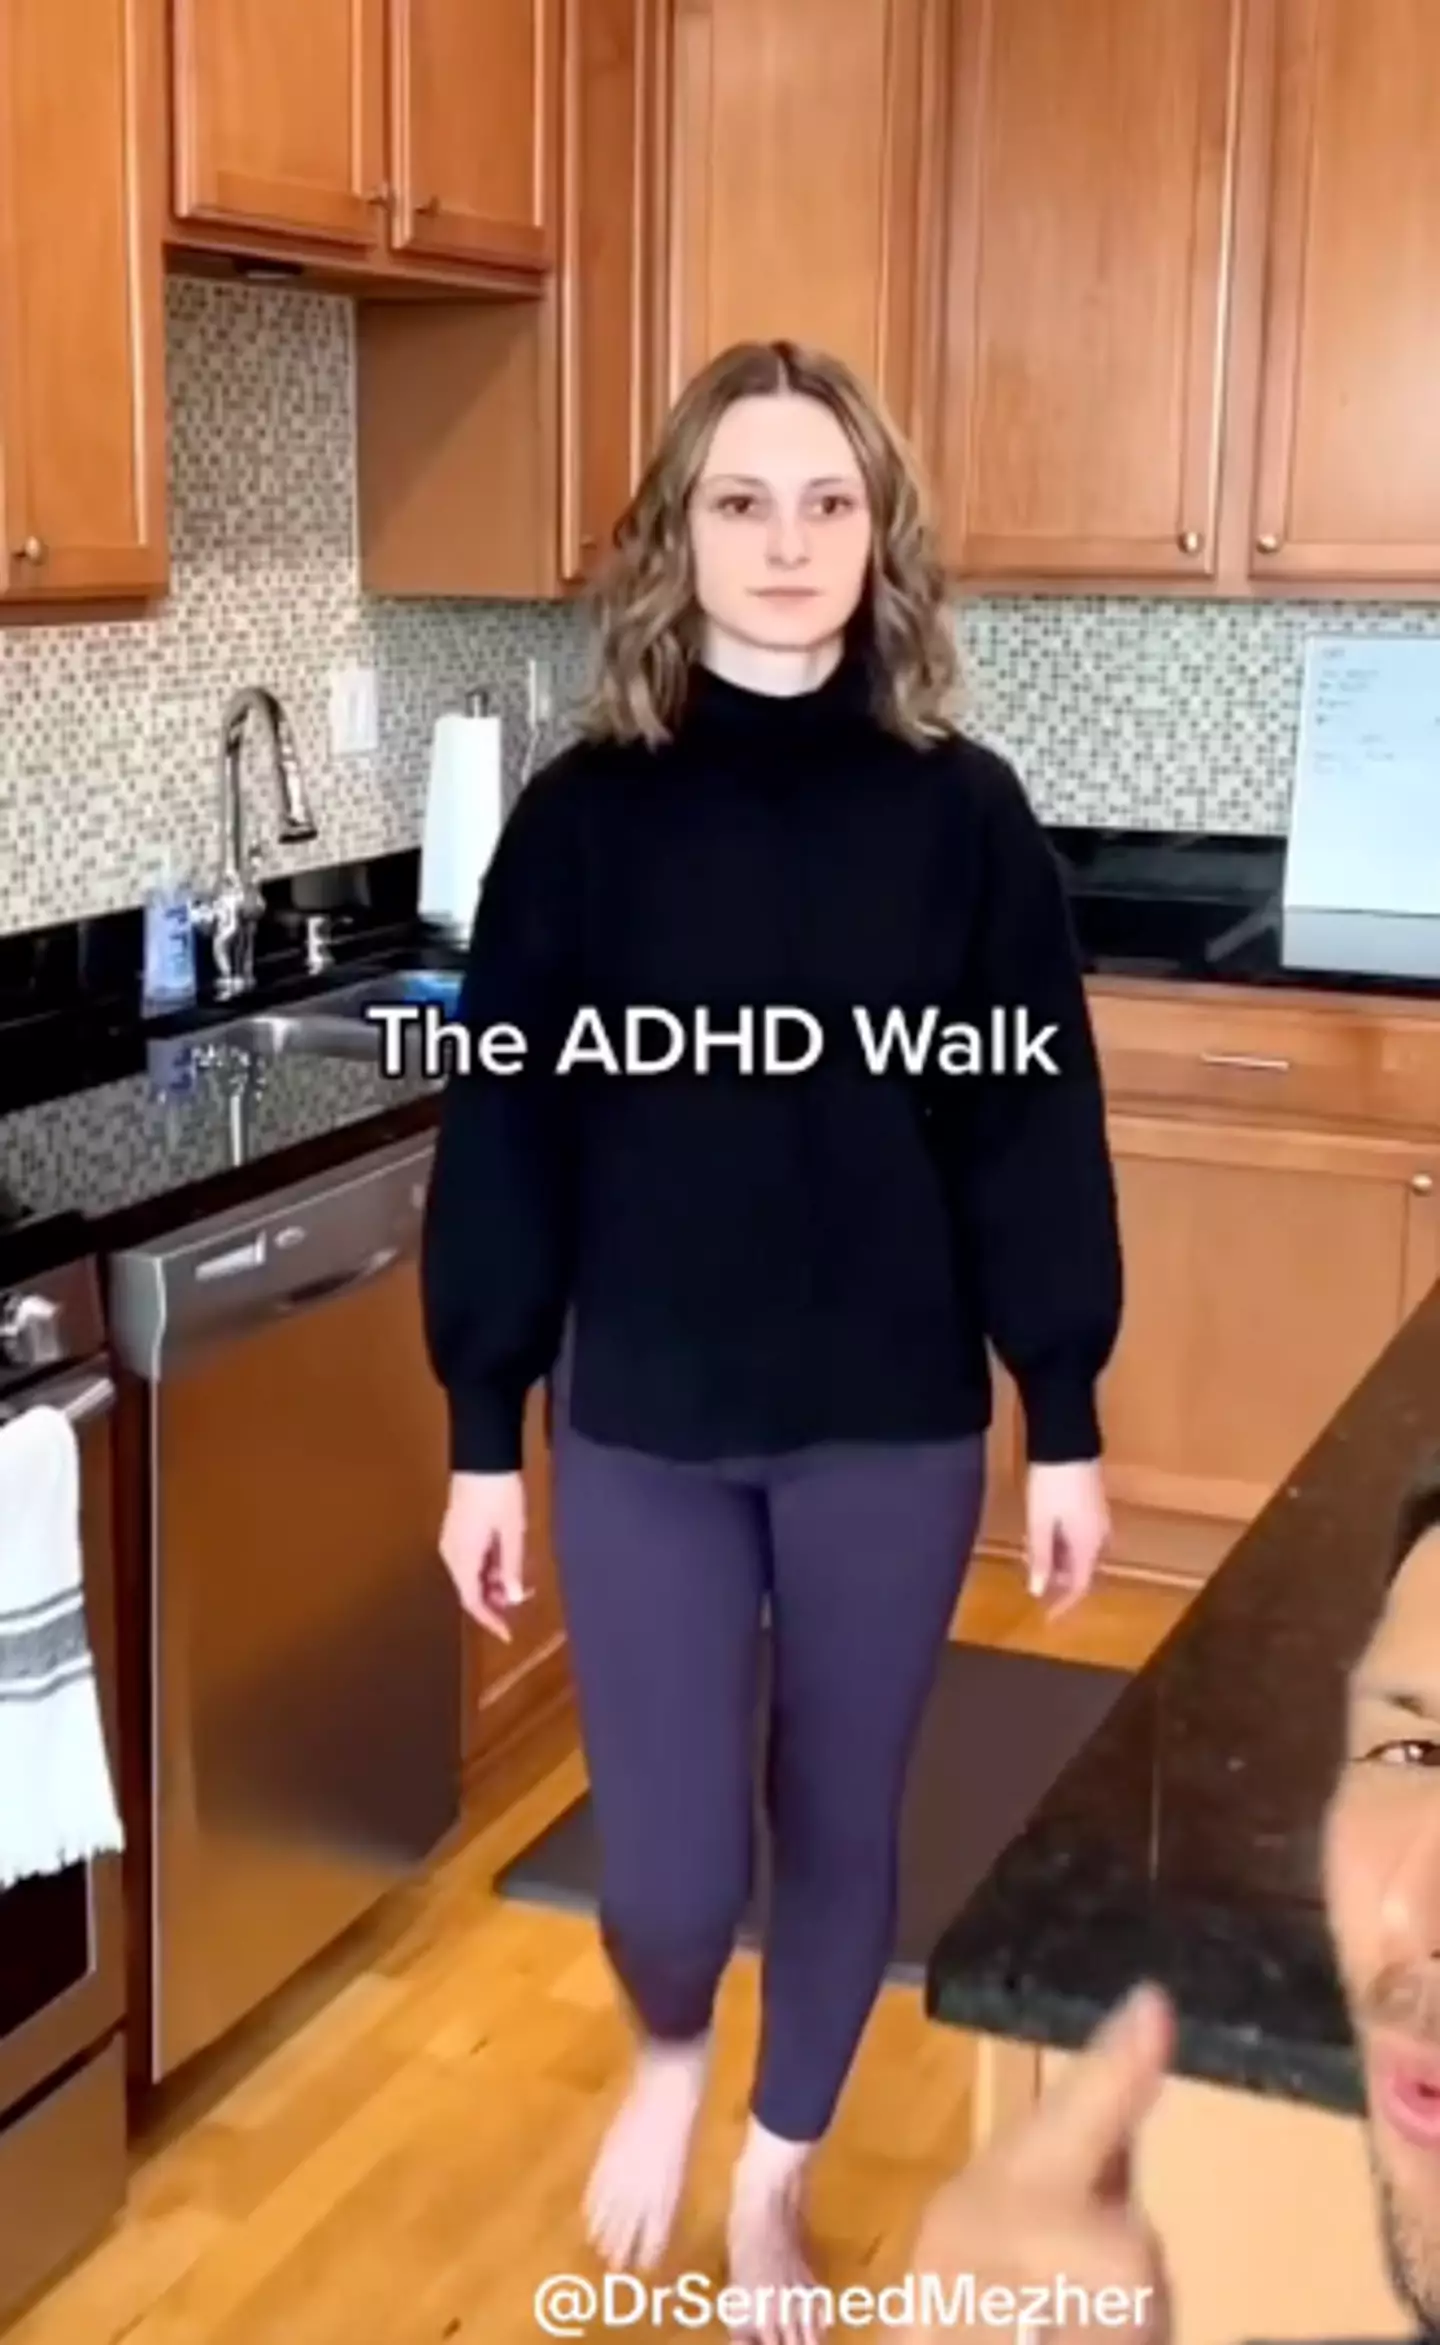 However, Dr Sermed Mezher (@drsermedmezher), an award winning doctor from London, has revealed why some people with ADHD do a very common walk around the house.